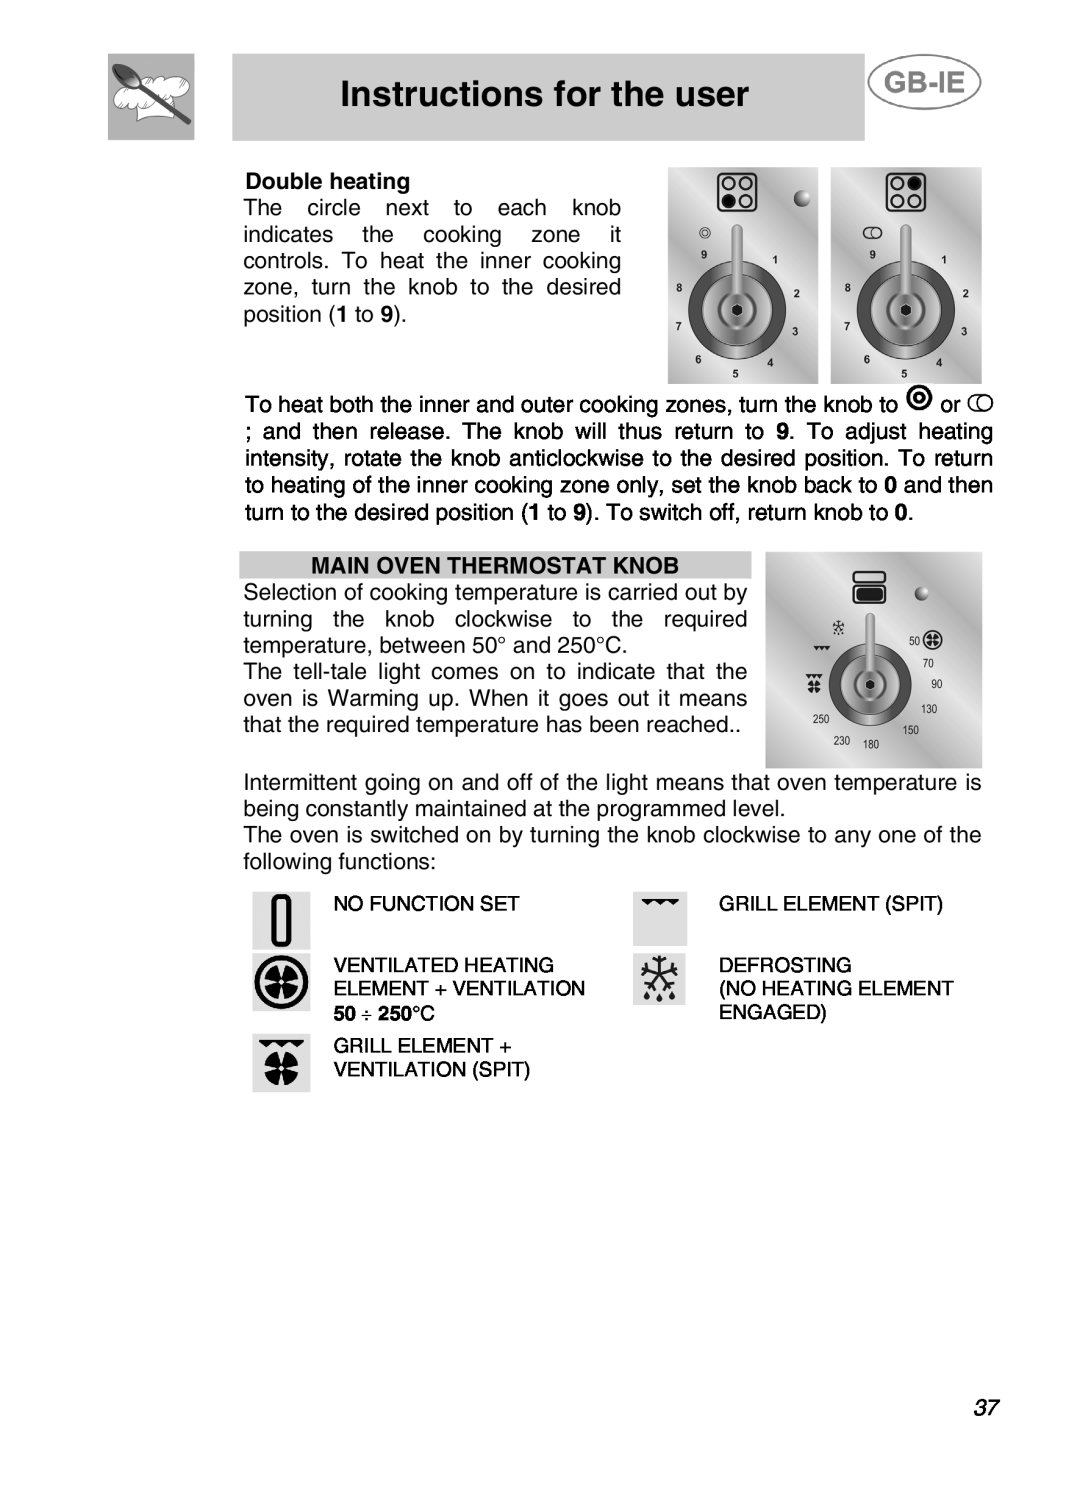 Smeg A42C-2, A42C-5 manual Double heating, Main Oven Thermostat Knob, Instructions for the user 